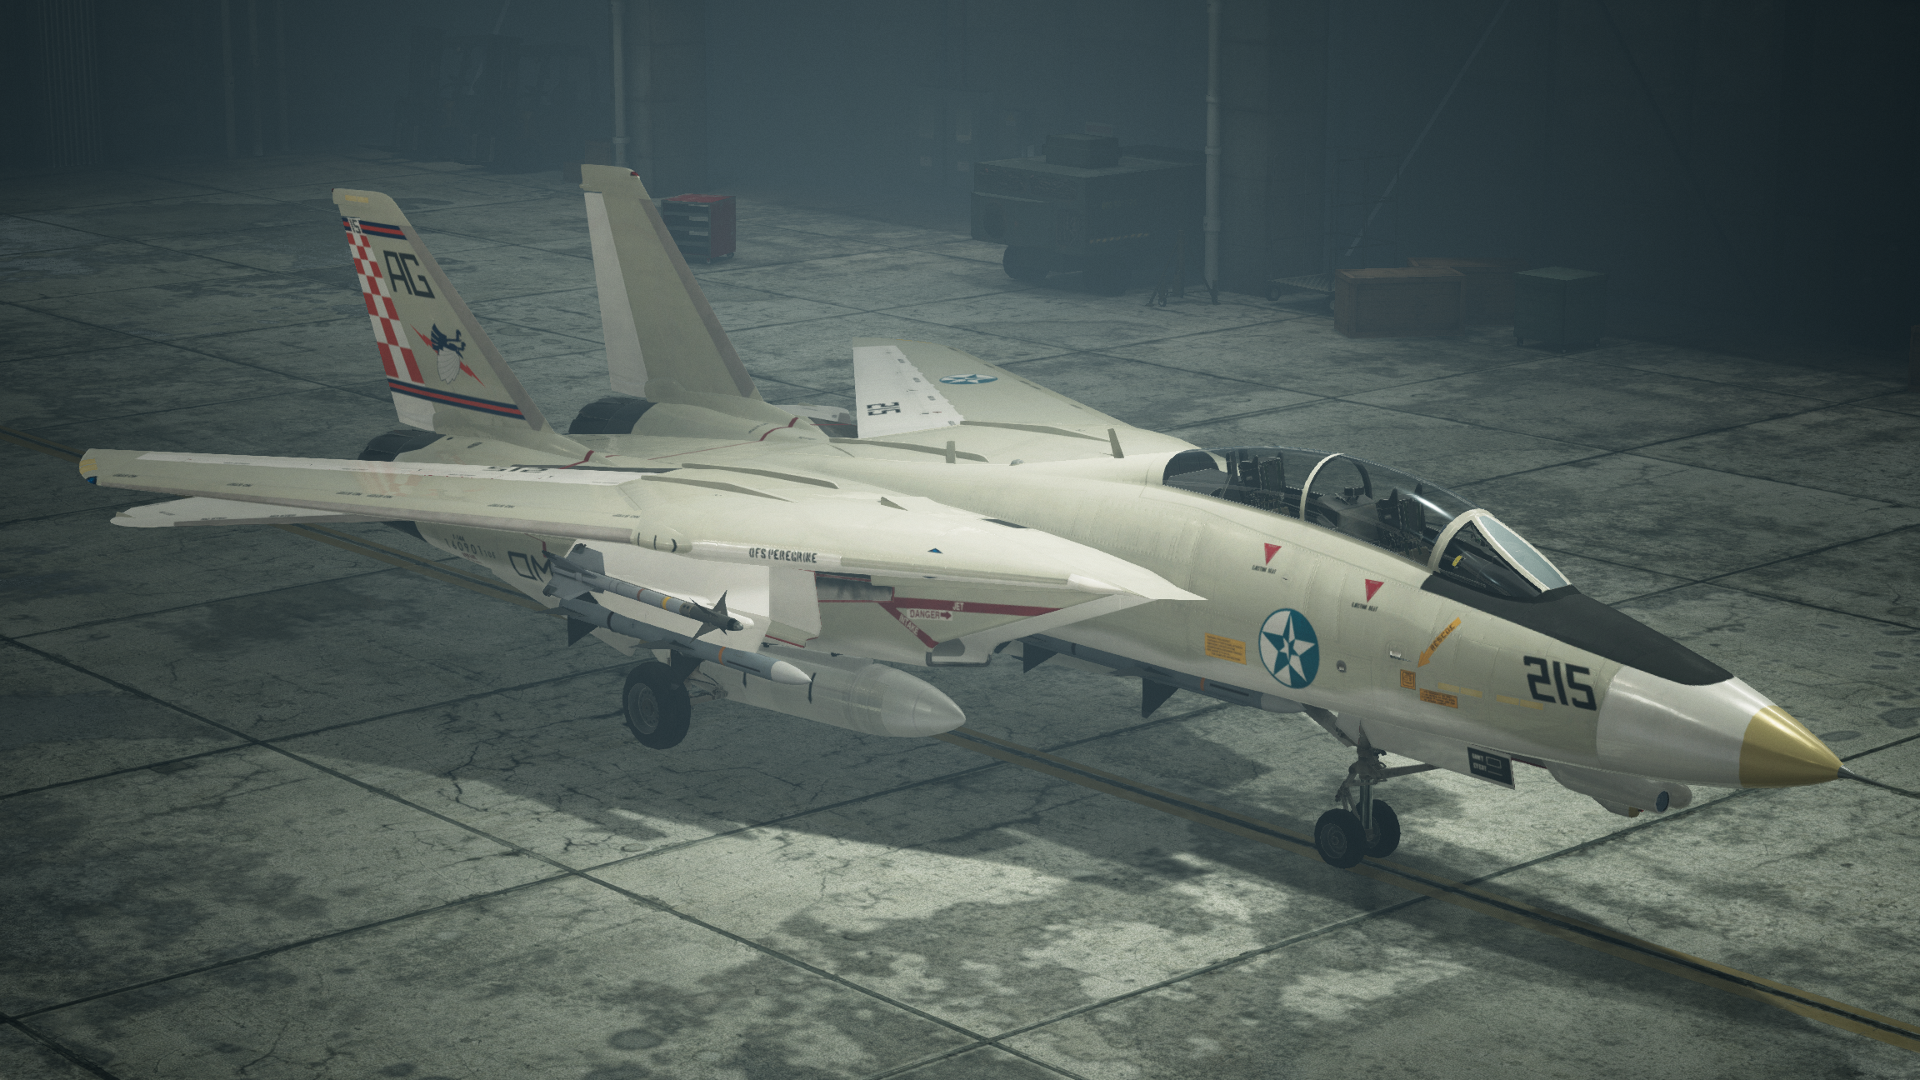 A free update for Ace Combat 7 adds new skins and classic Ace